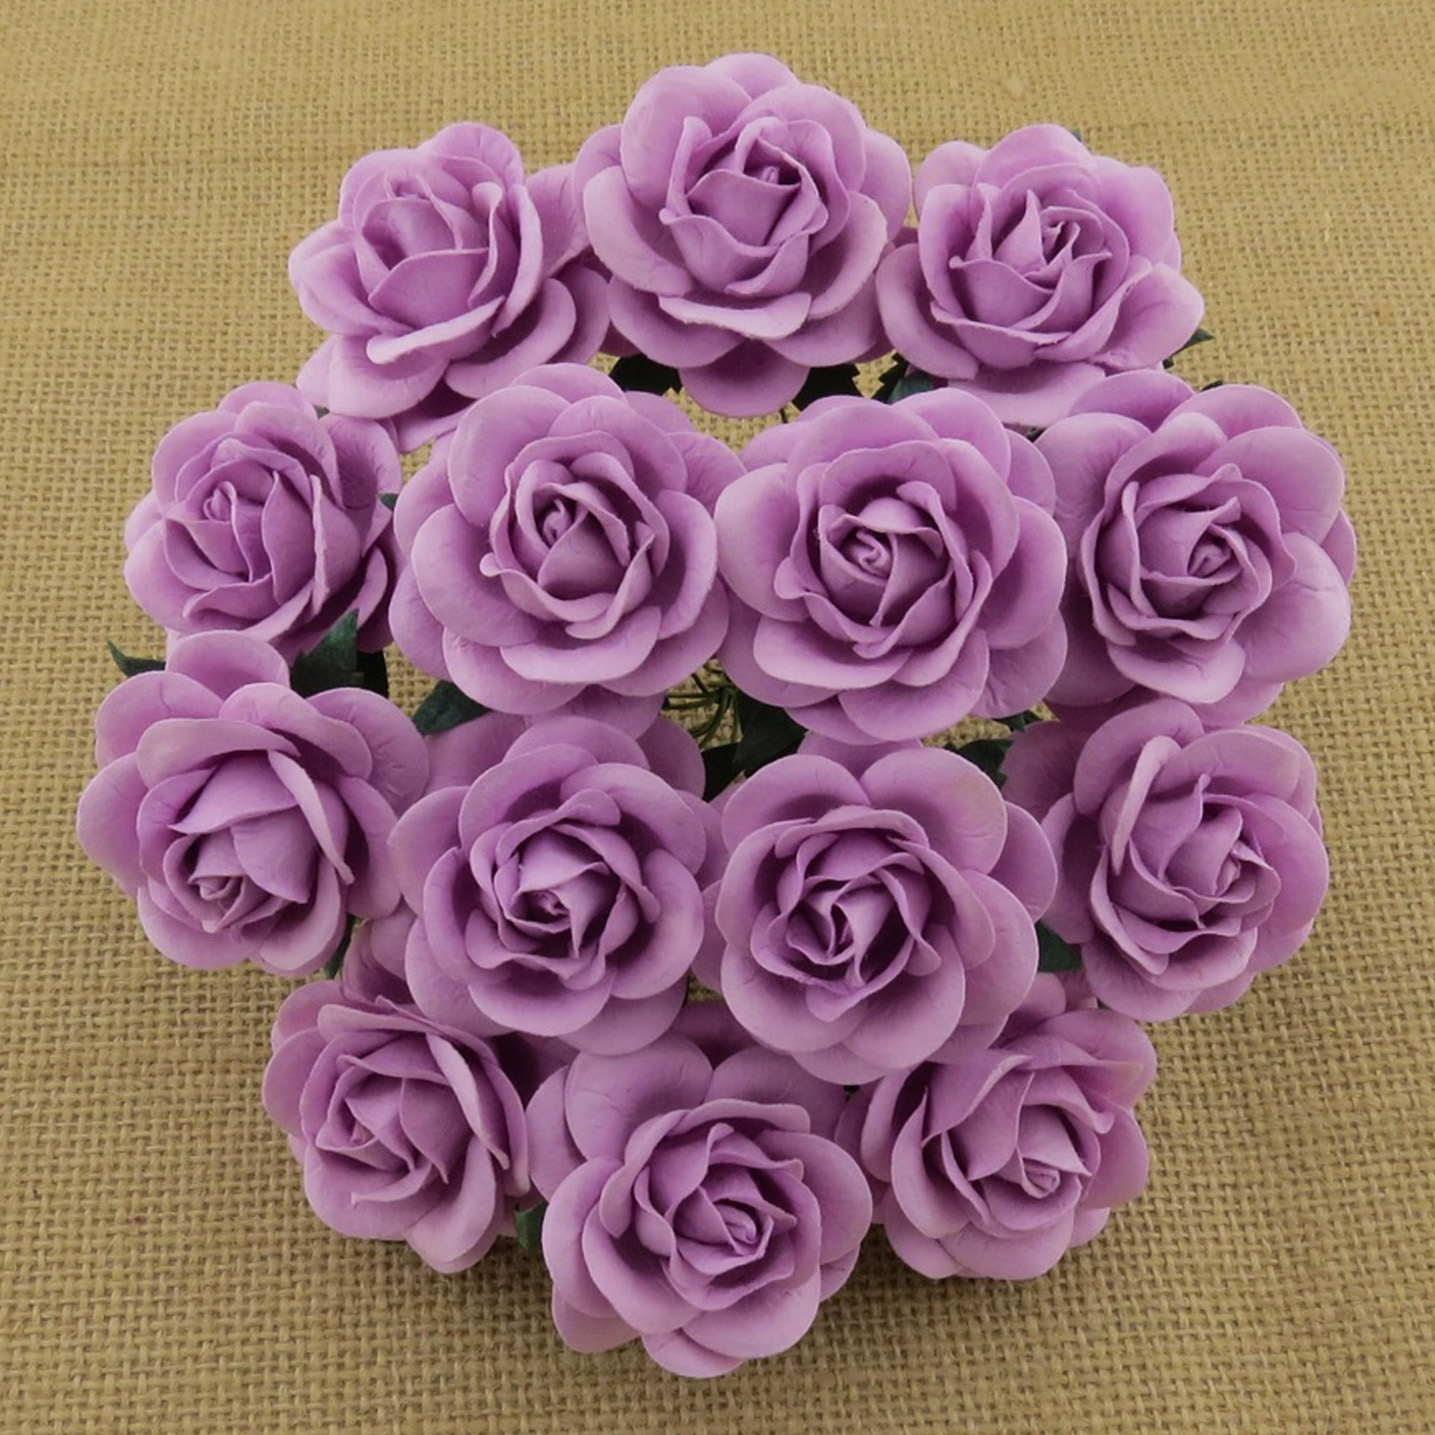 50 LILAC MULBERRY PAPER TRELLIS ROSES